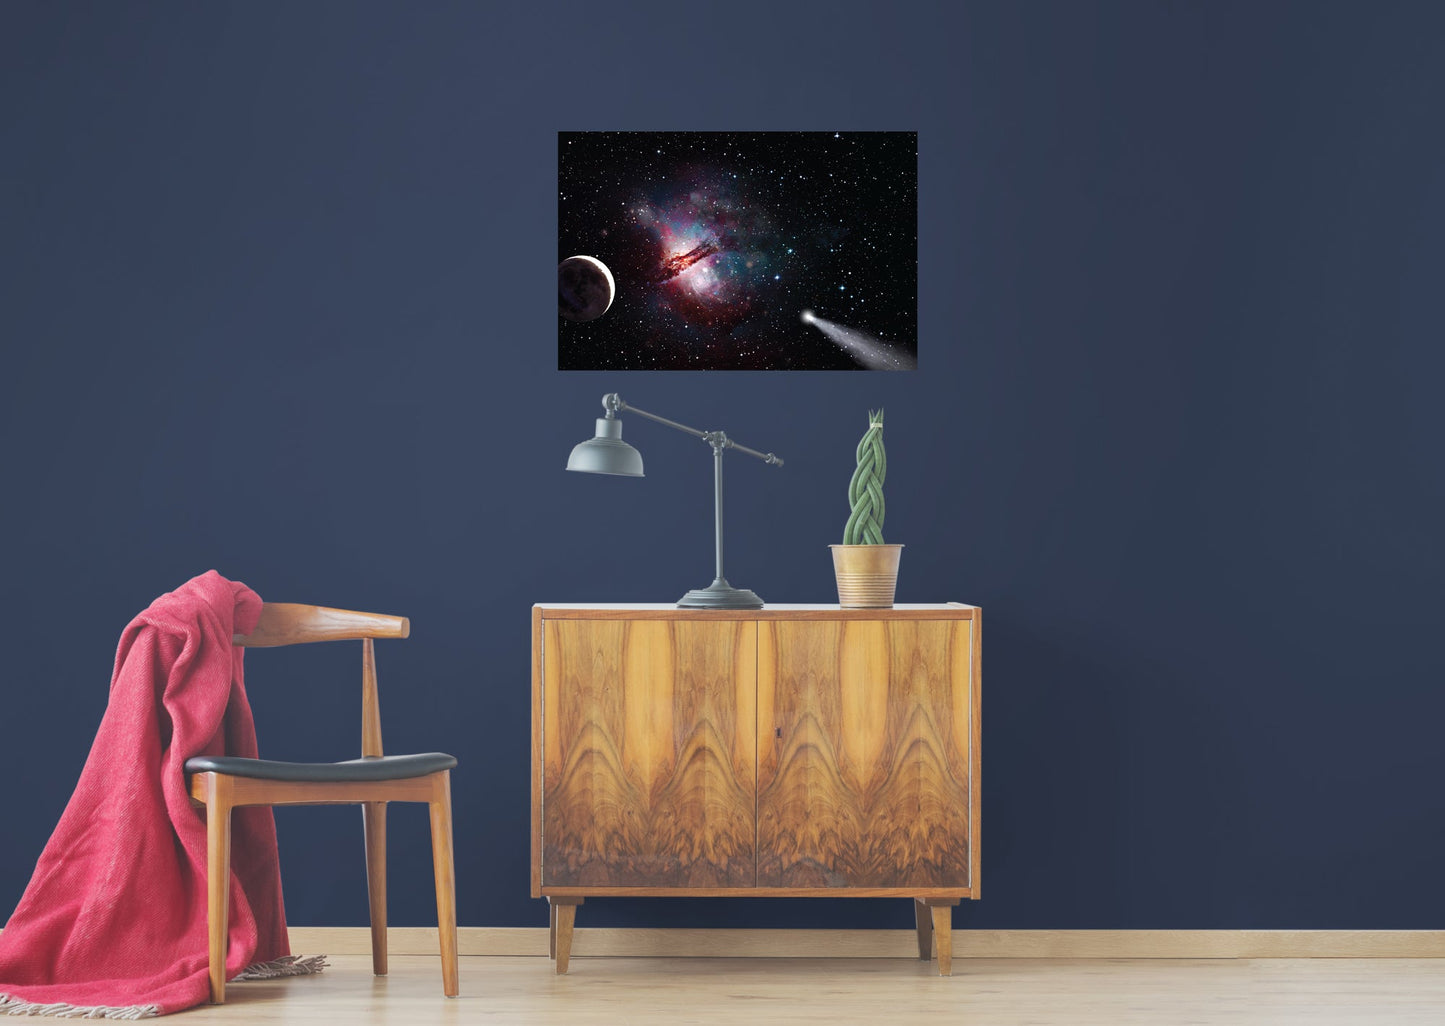 Planets: Asteroid Mural        -   Removable     Adhesive Decal